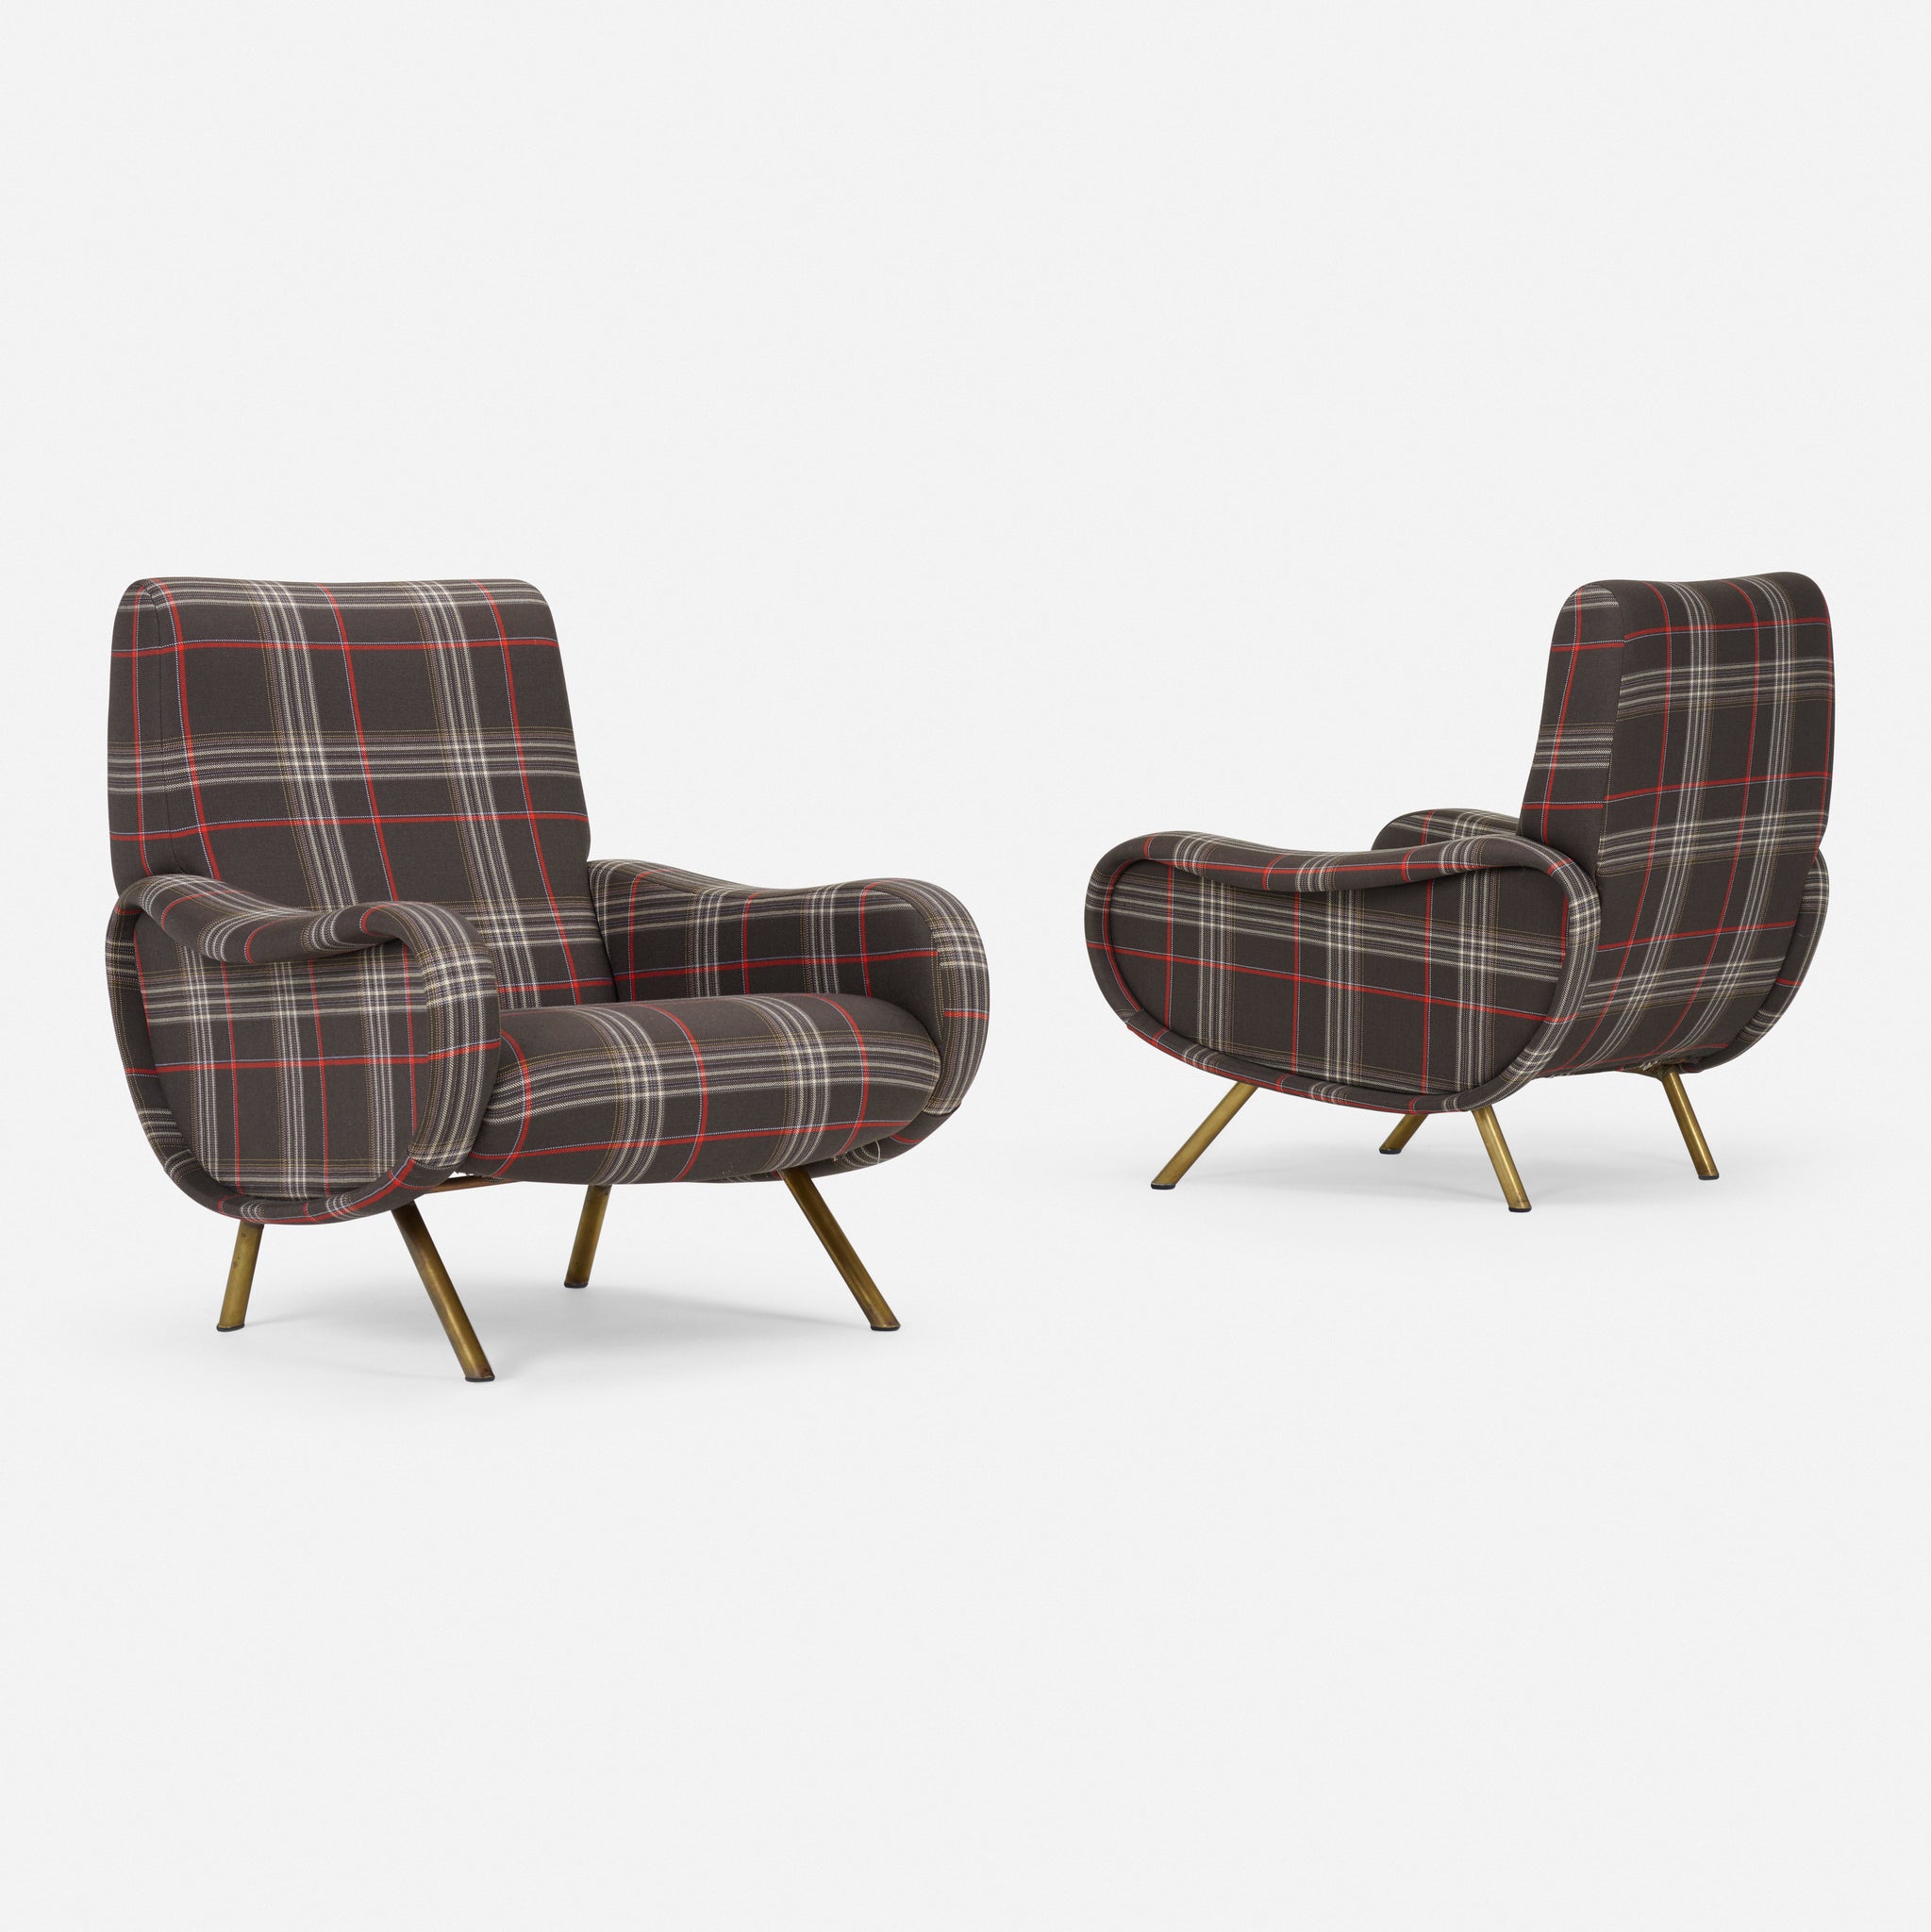 Lady Lounge Chairs, Pair